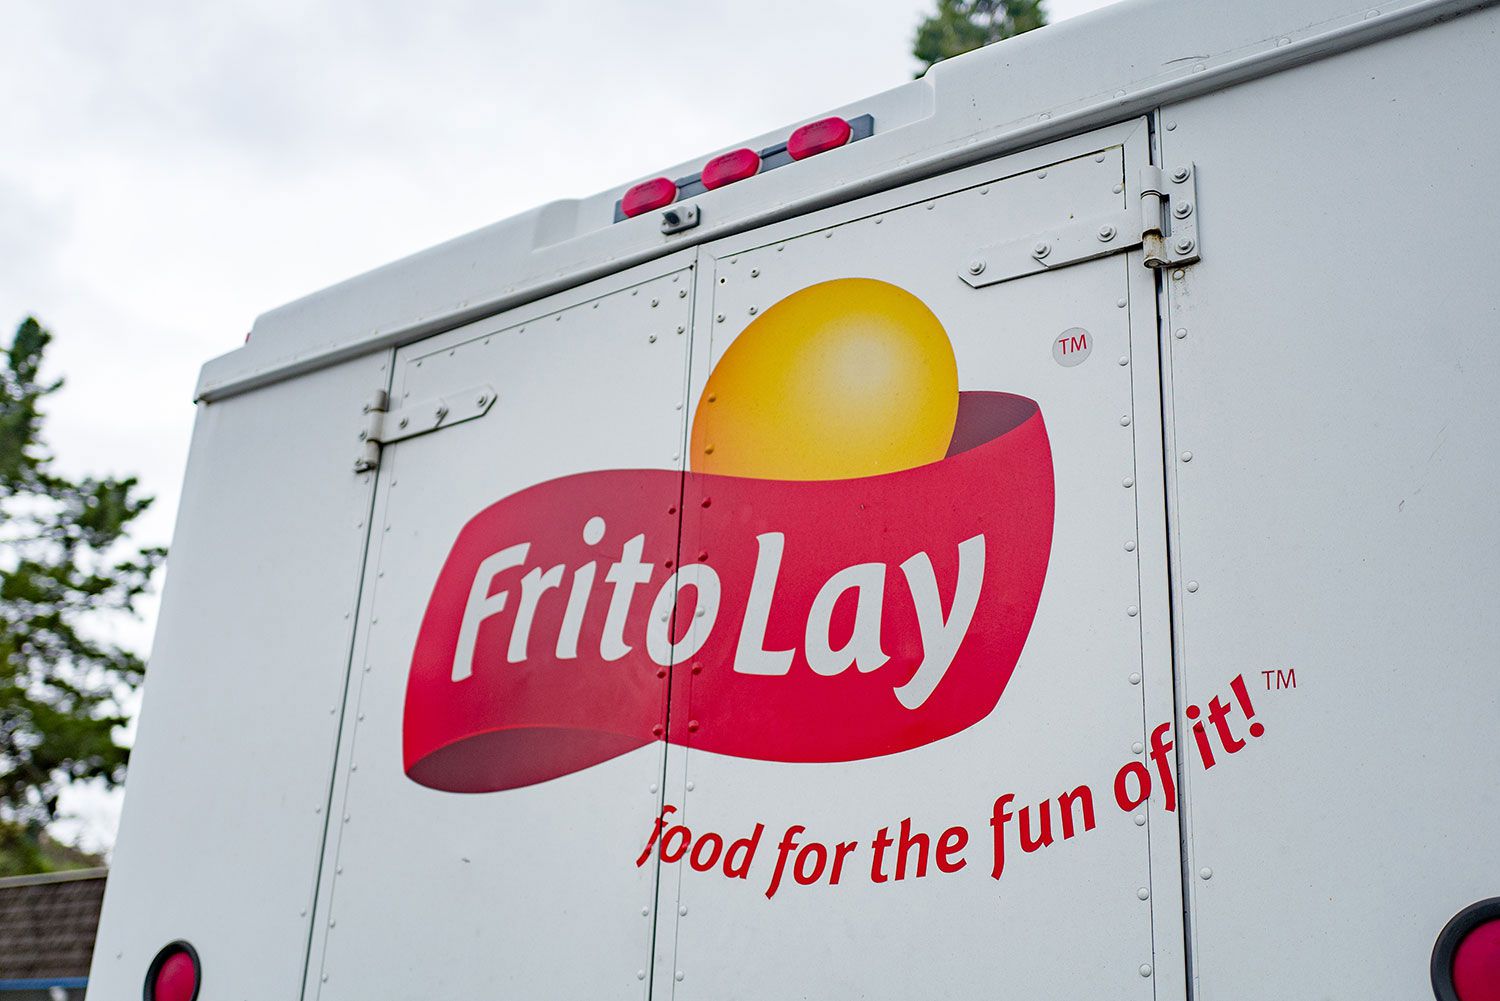 Logo for snack food manufacturer Frito Lay on a delivery truck in Lafayette, California, April 4, 2019. (Photo by Smith Collection/Gado/Getty Images)